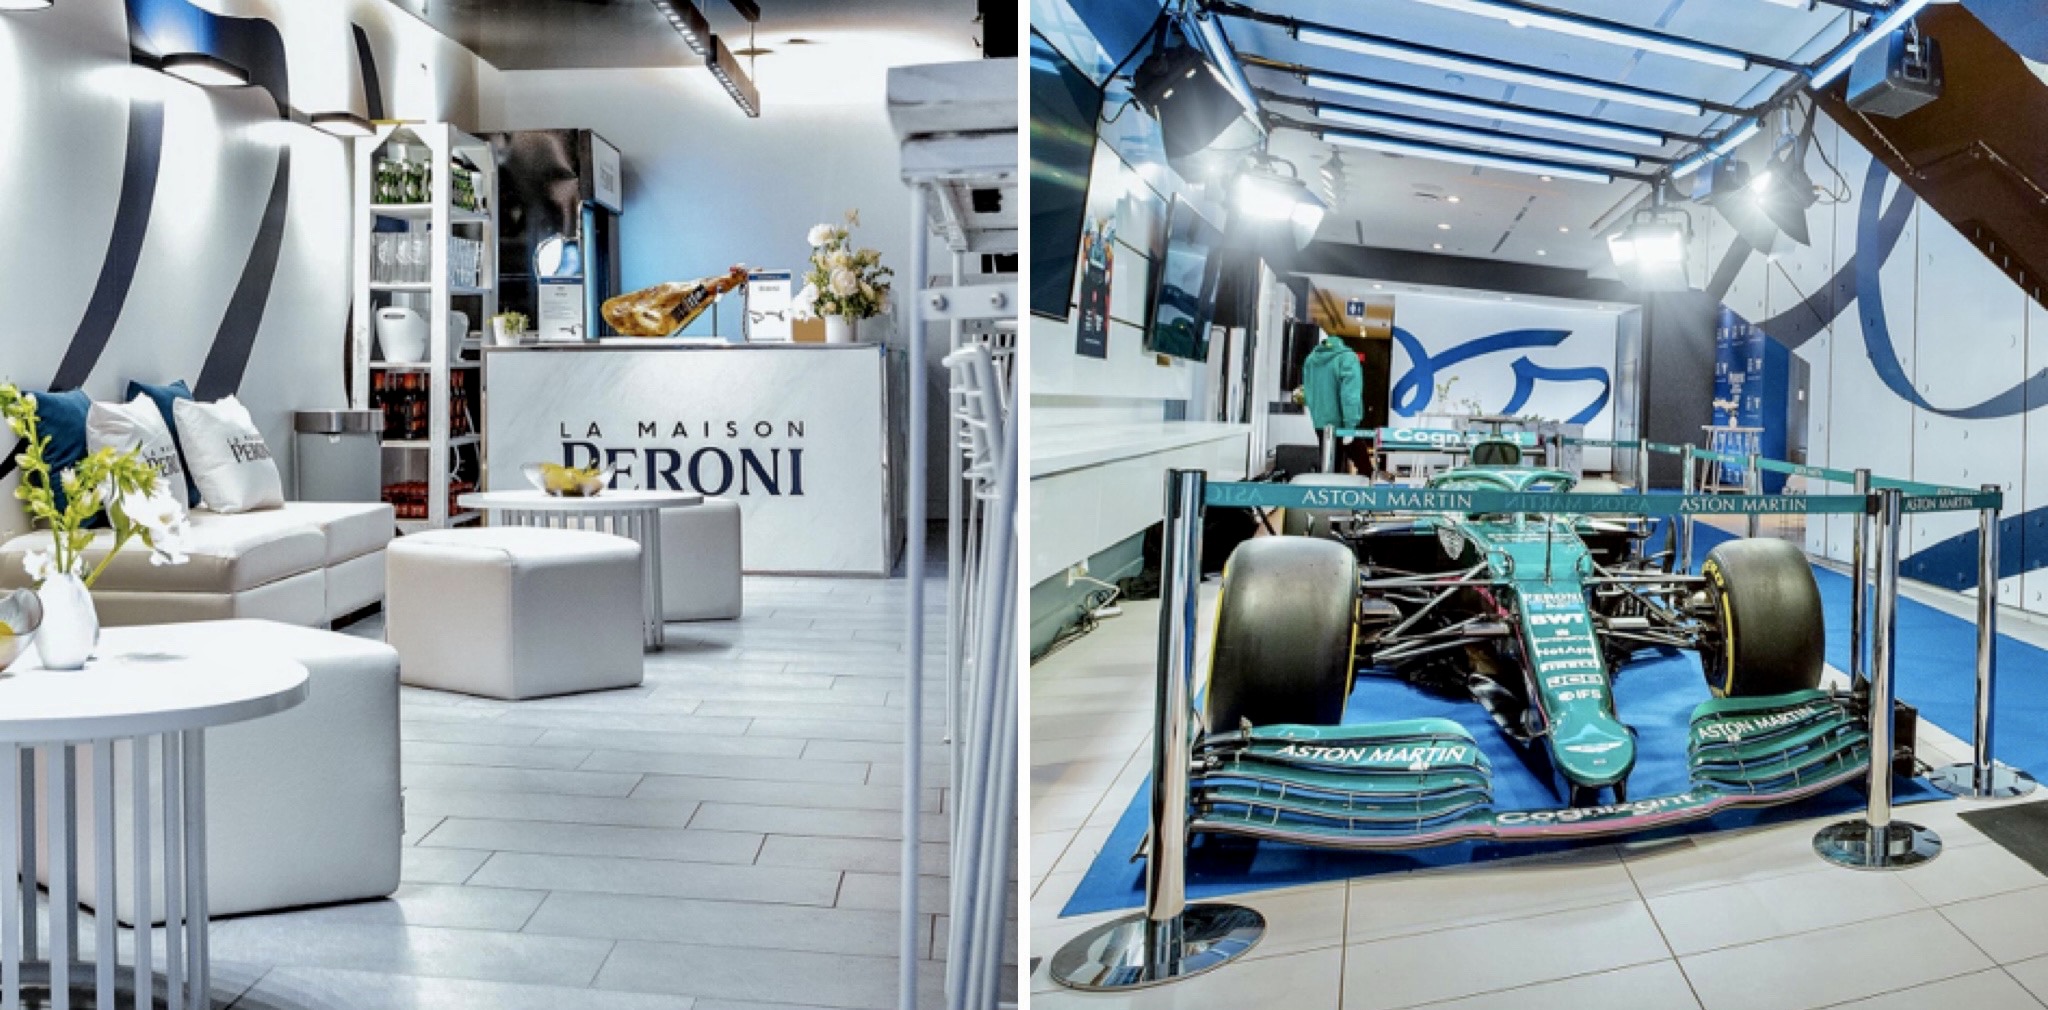 La Maison Peroni’s Le Paddock is now open in Montreal for F1 weekend